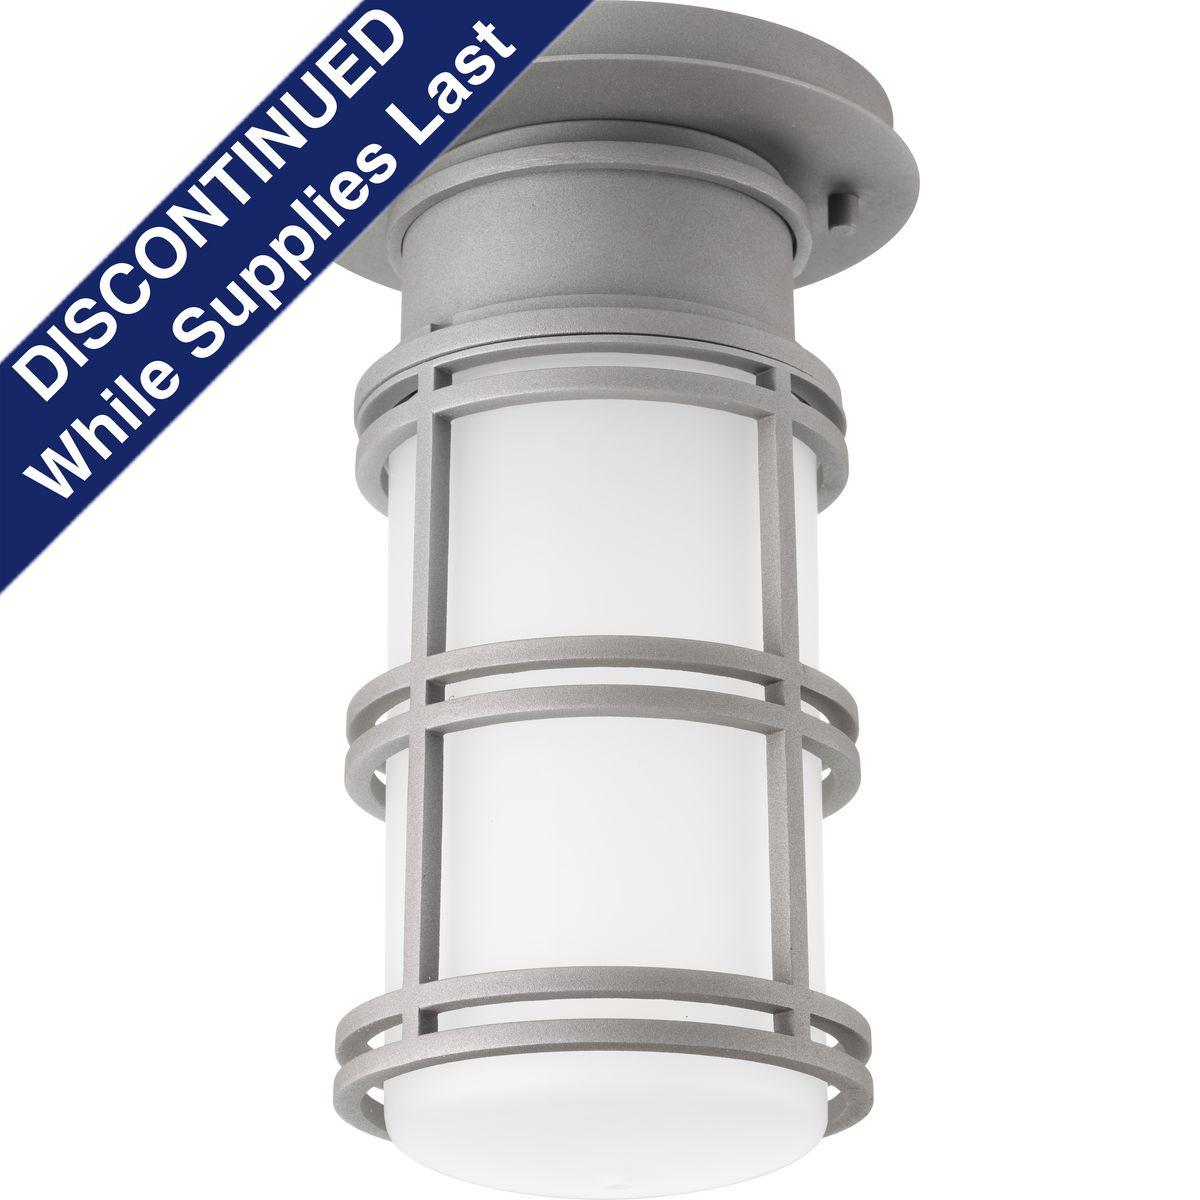 Hubbell P6536-13630K9 The one-light hanging lantern from the Belle LED Collection features nautical undertones and a cage reminiscent of industrial spaces that is ideal for both interior and exterior settings. This fixture is available in convertible ceiling/pendant and wall m